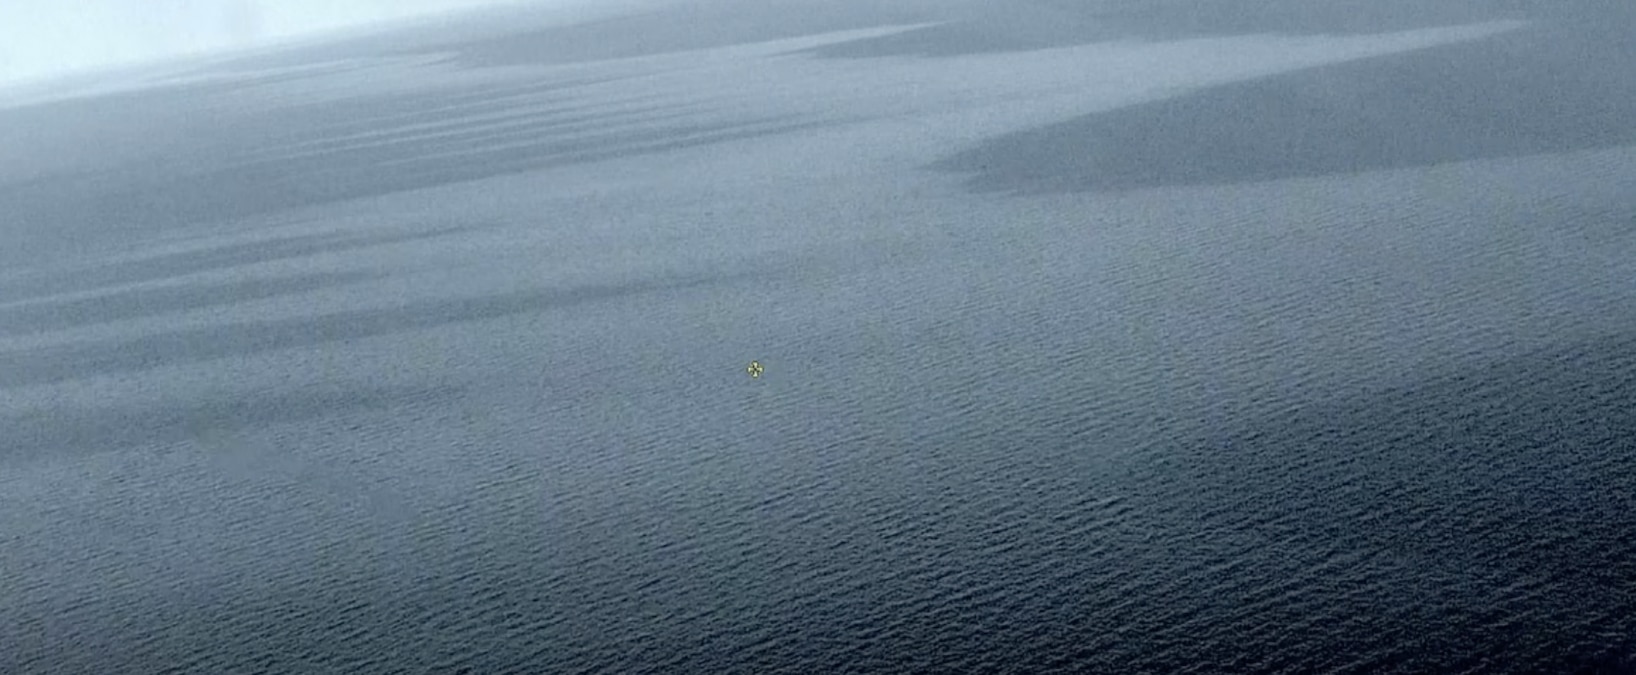 A spill of an unknown substance off the coast of Sweden